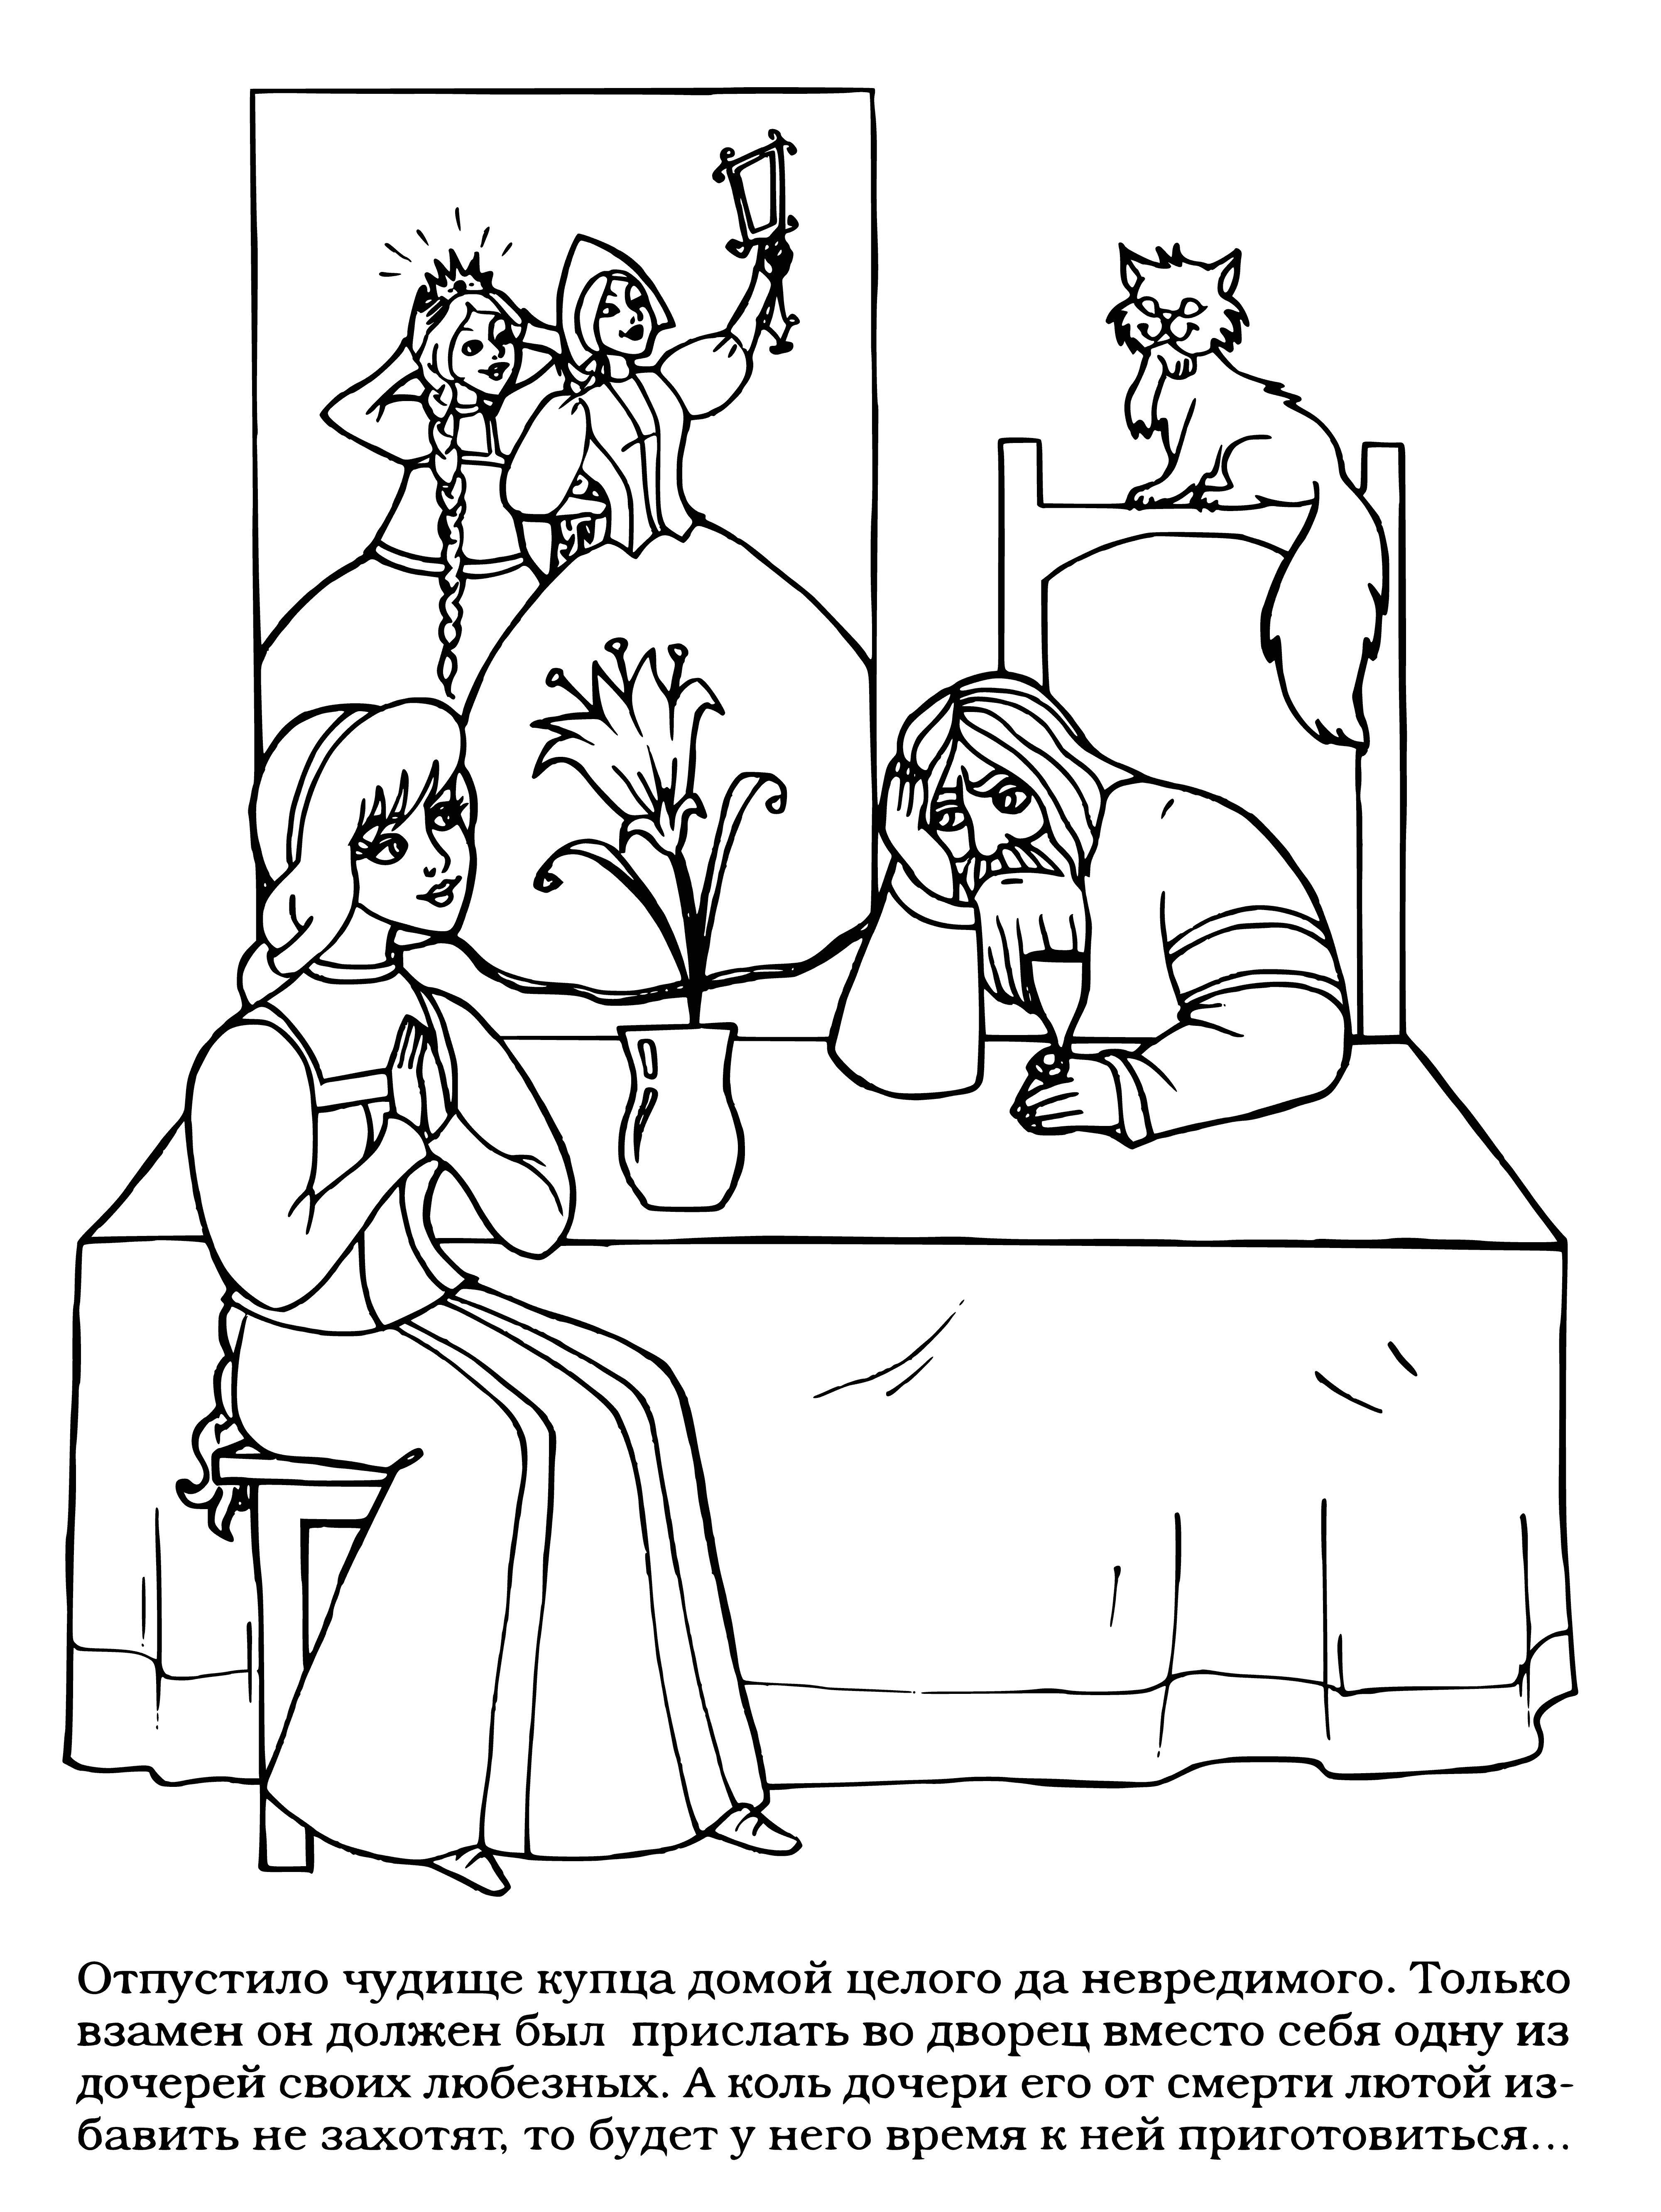 coloring page: Man in purple robe and scarf looks worriedly at boiling pot on fire. Wears a headband and has long beard.